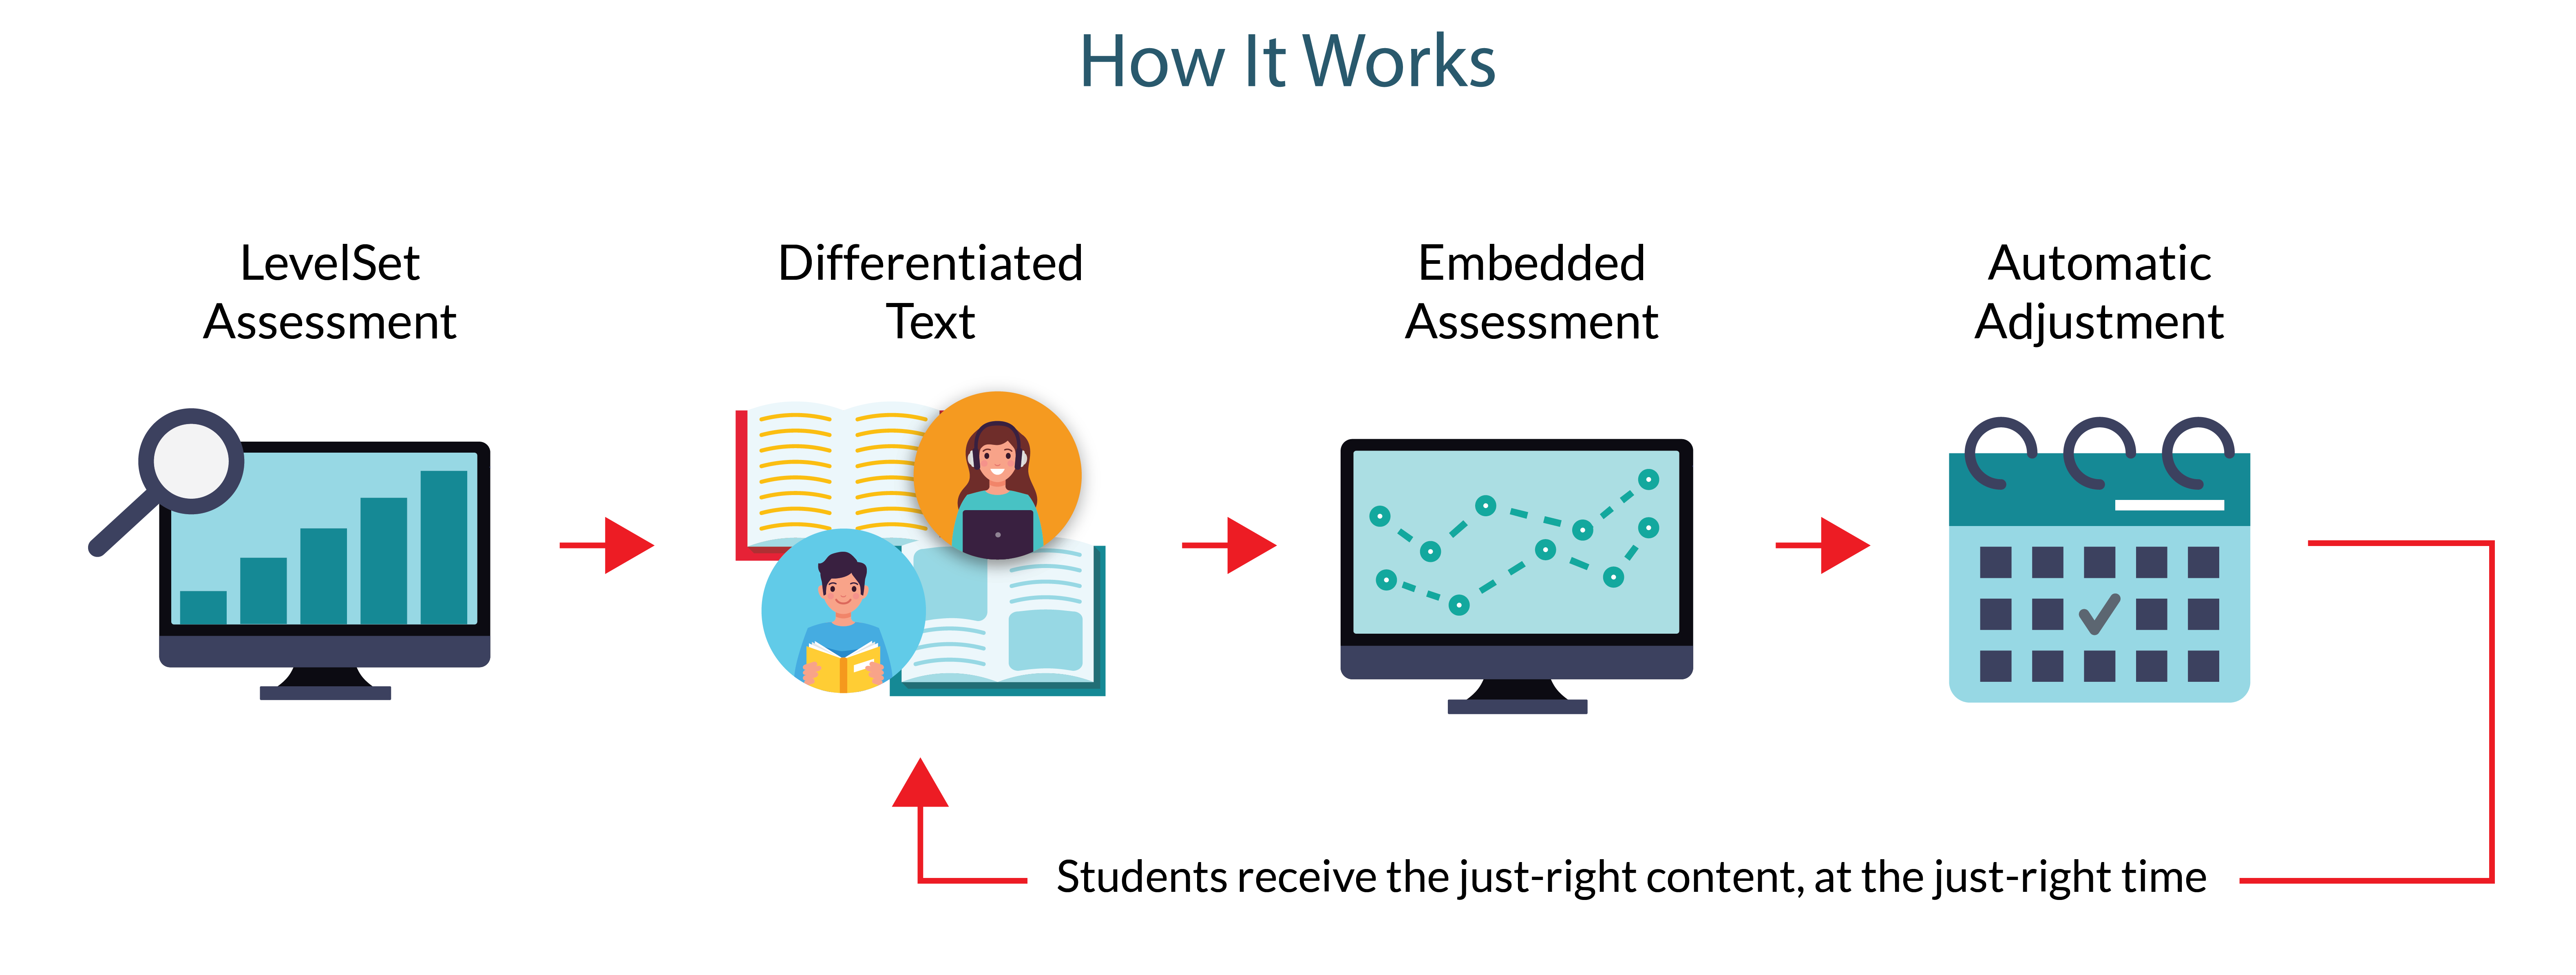 How It Works, LevelSet Assessment, Differentiated Text, Embedded Assessment, Automatic Adjustment, Students receive the just - right content, at the just - right time